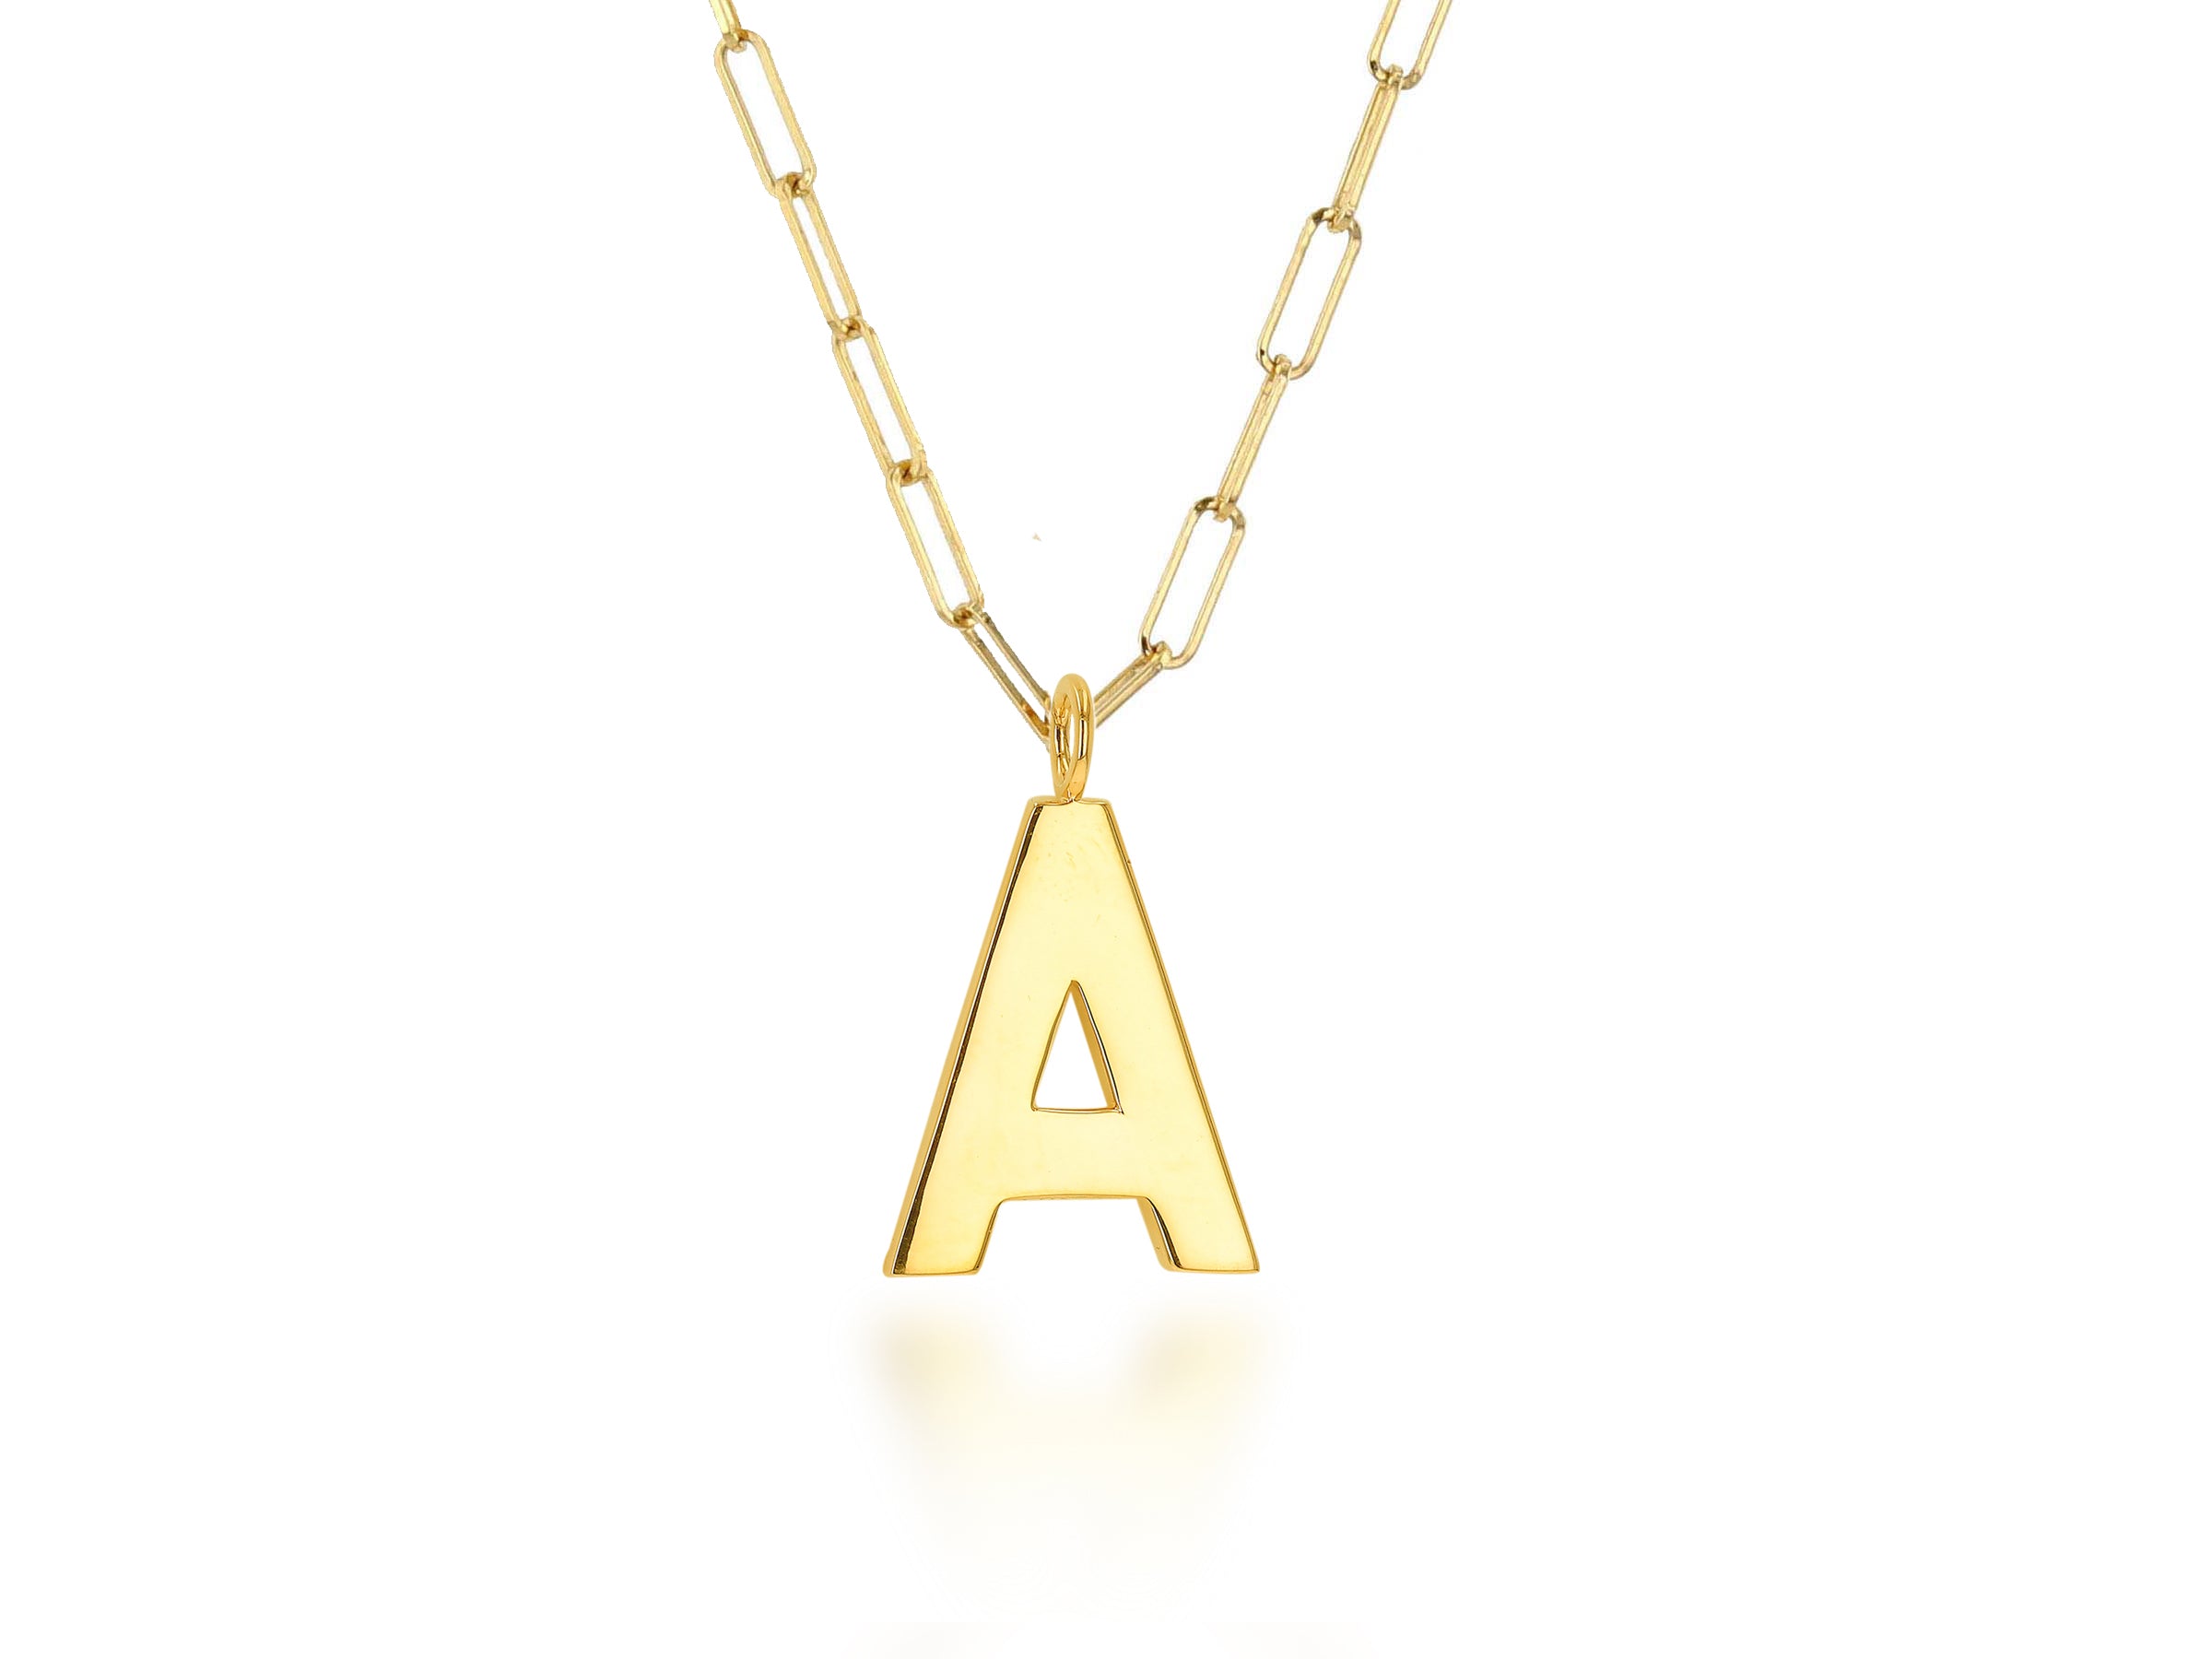 Oversized Block Letter Charm With Baby Link Chain